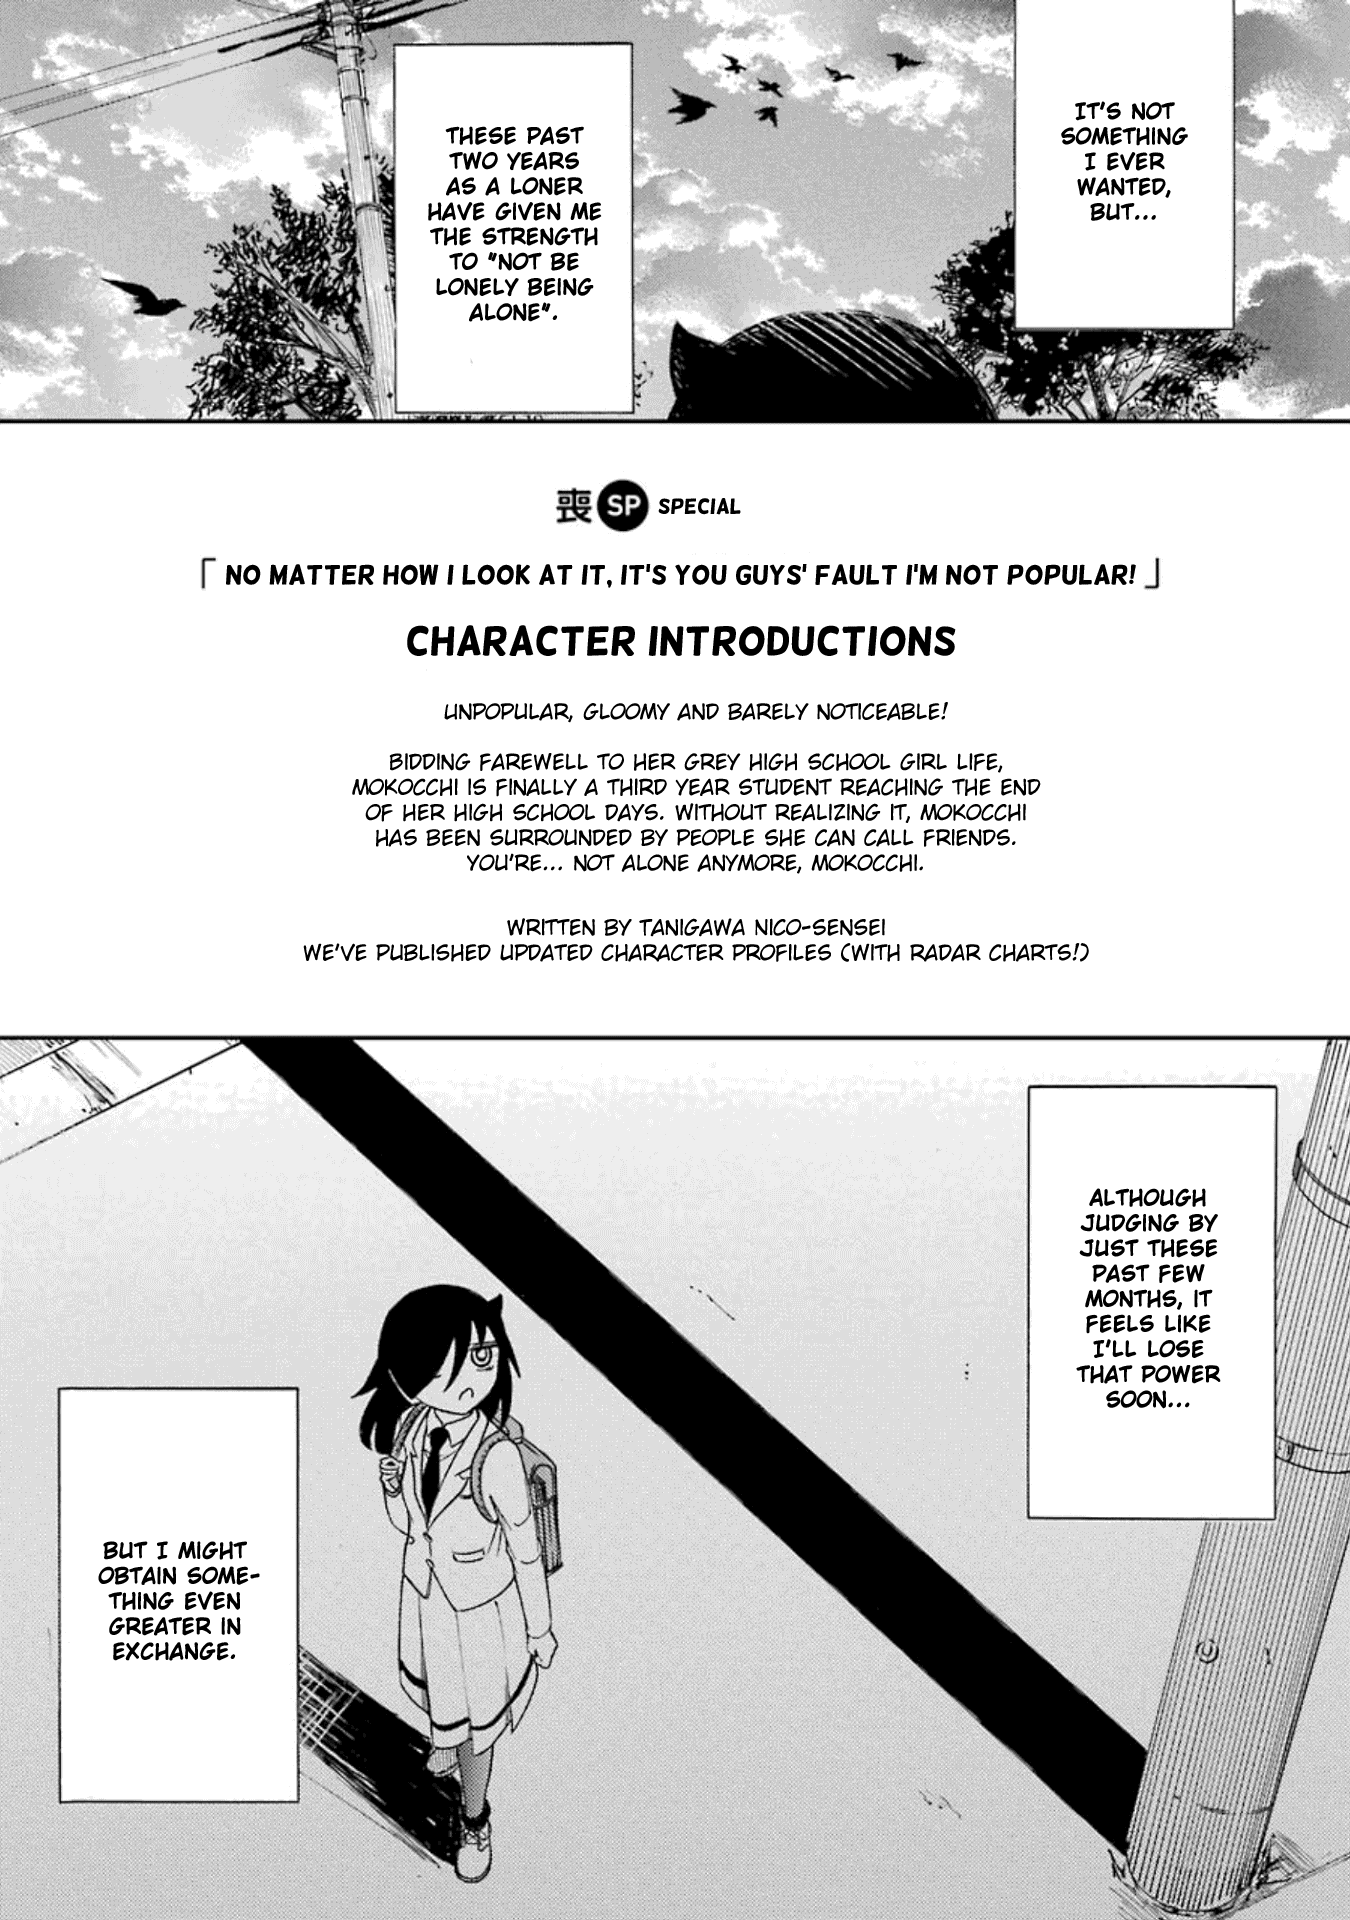 It's Not My Fault That I'm Not Popular! Vol.18 Chapter 176.6: Volume 18 Special Edition Booklet: Character Introductions - Picture 1